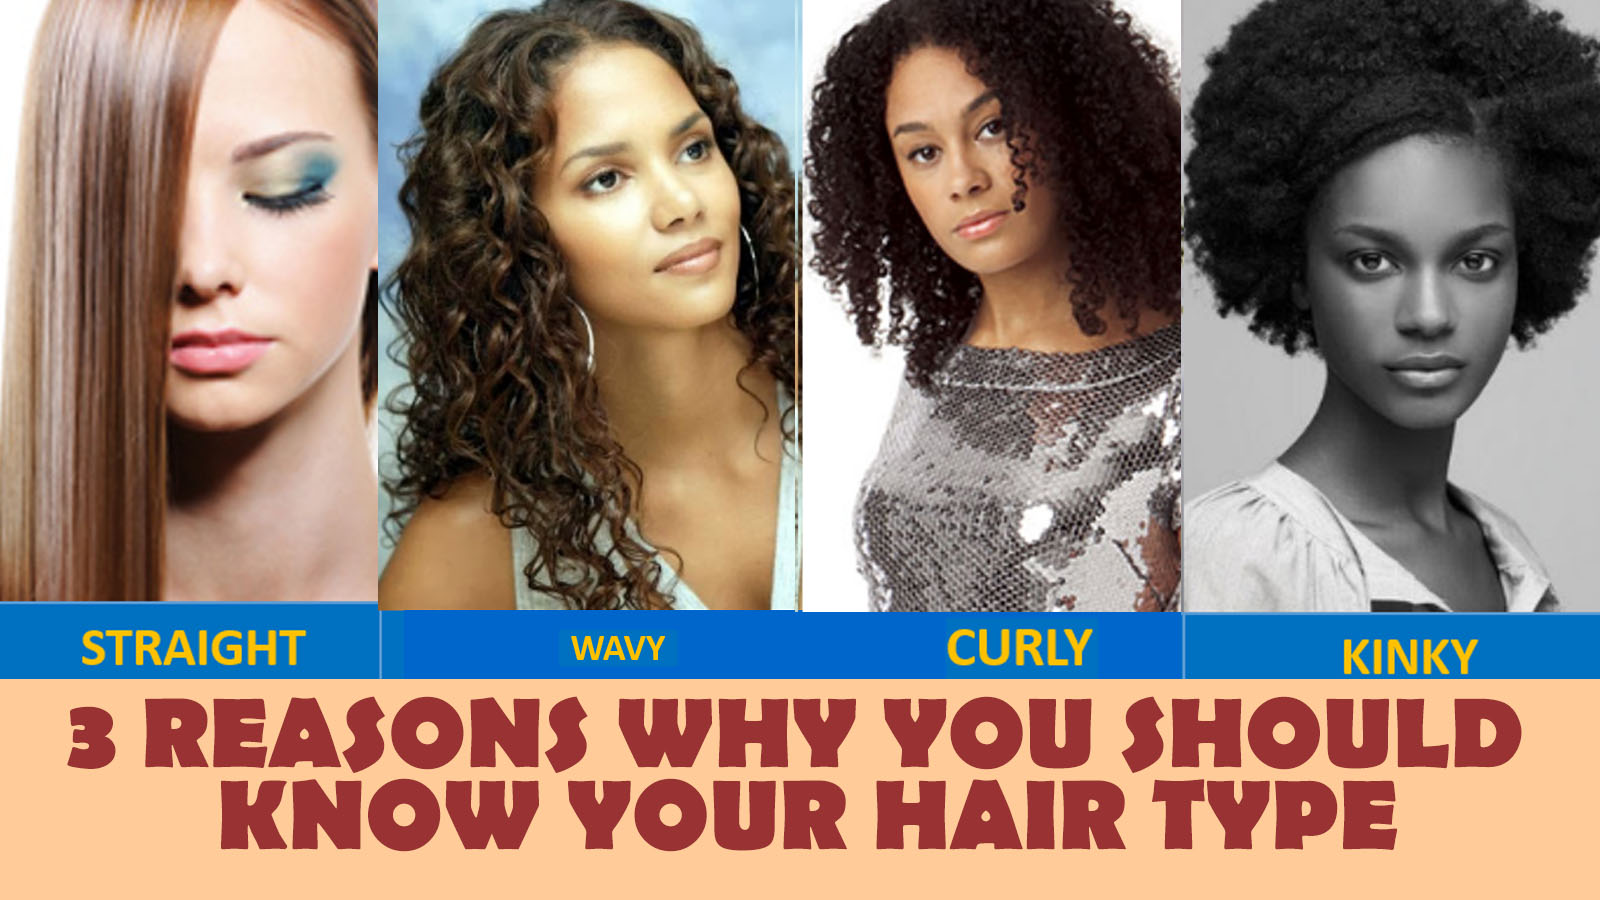 3 REASONS WHY YOU SHOULD KNOW YOUR HAIR TYPE